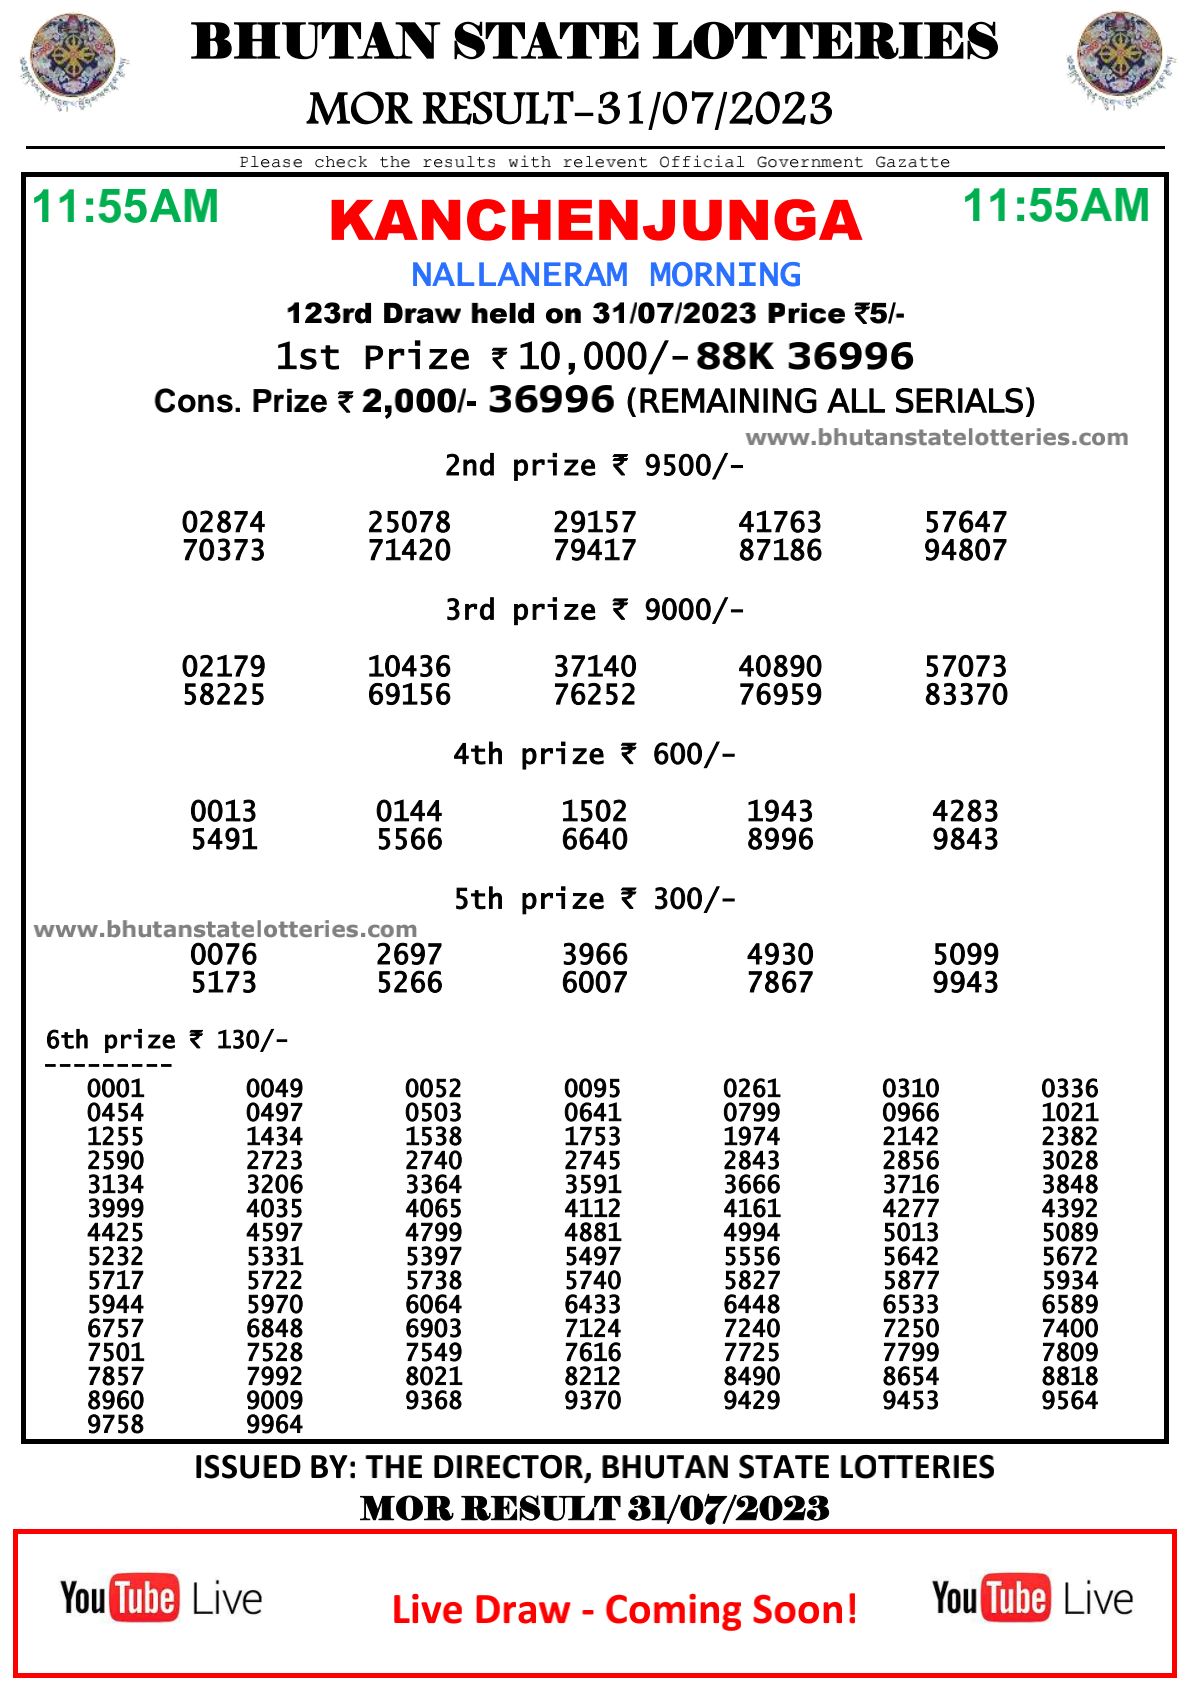 Bhutan State Lotteries Morning Result 31/07/2023